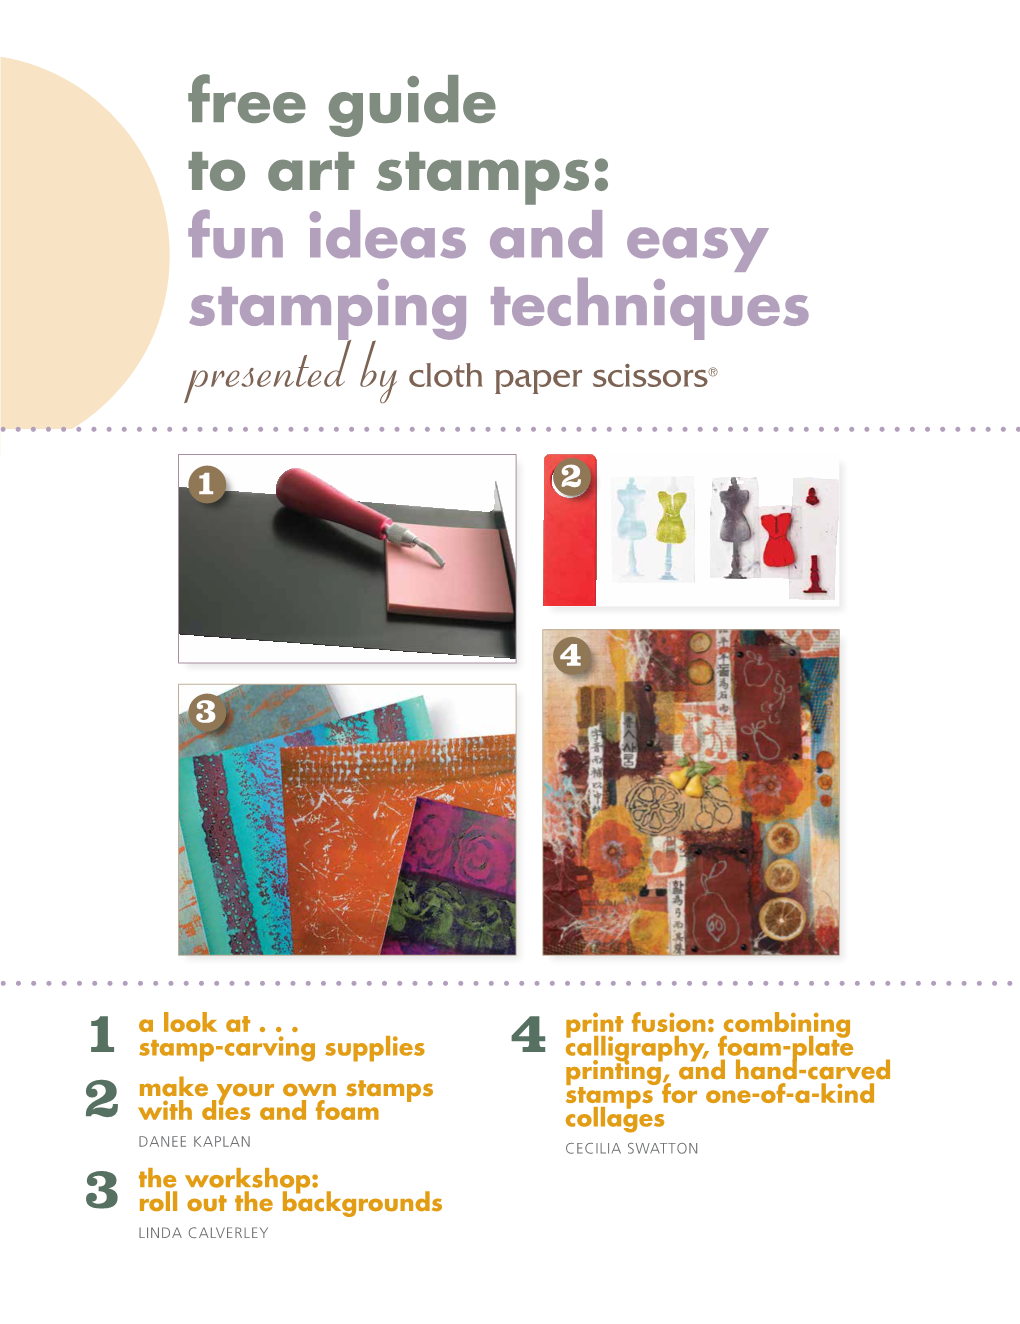 Free Guide to Art Stamps: Fun Ideas and Easy Stamping Techniques Presented by Cloth Paper Scissors®